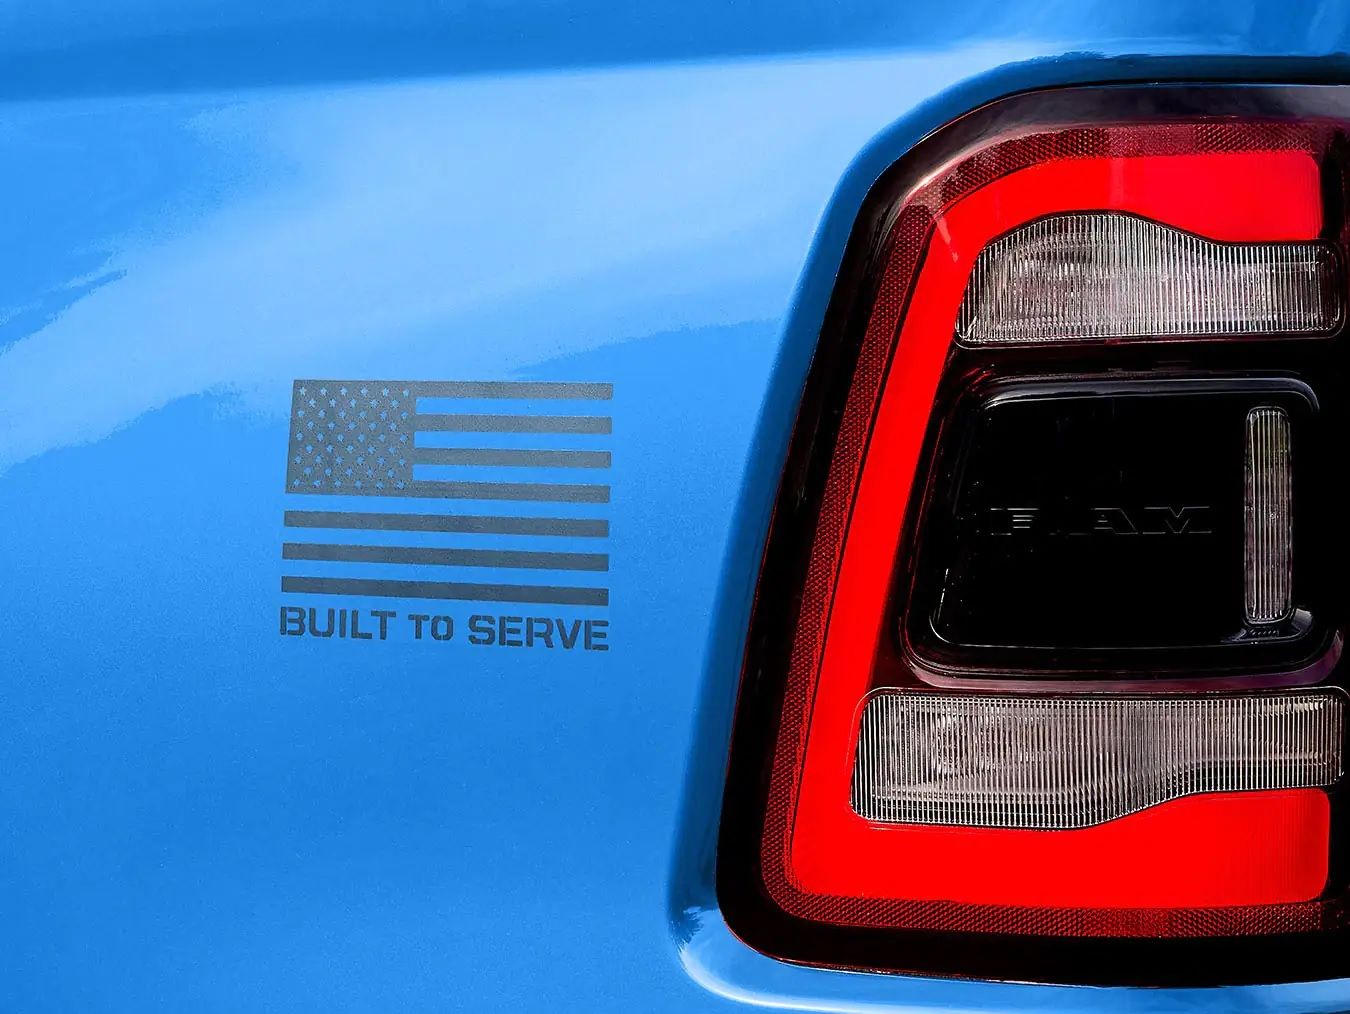 Ram 1500 Built to operate EMT edition tail light and US flag